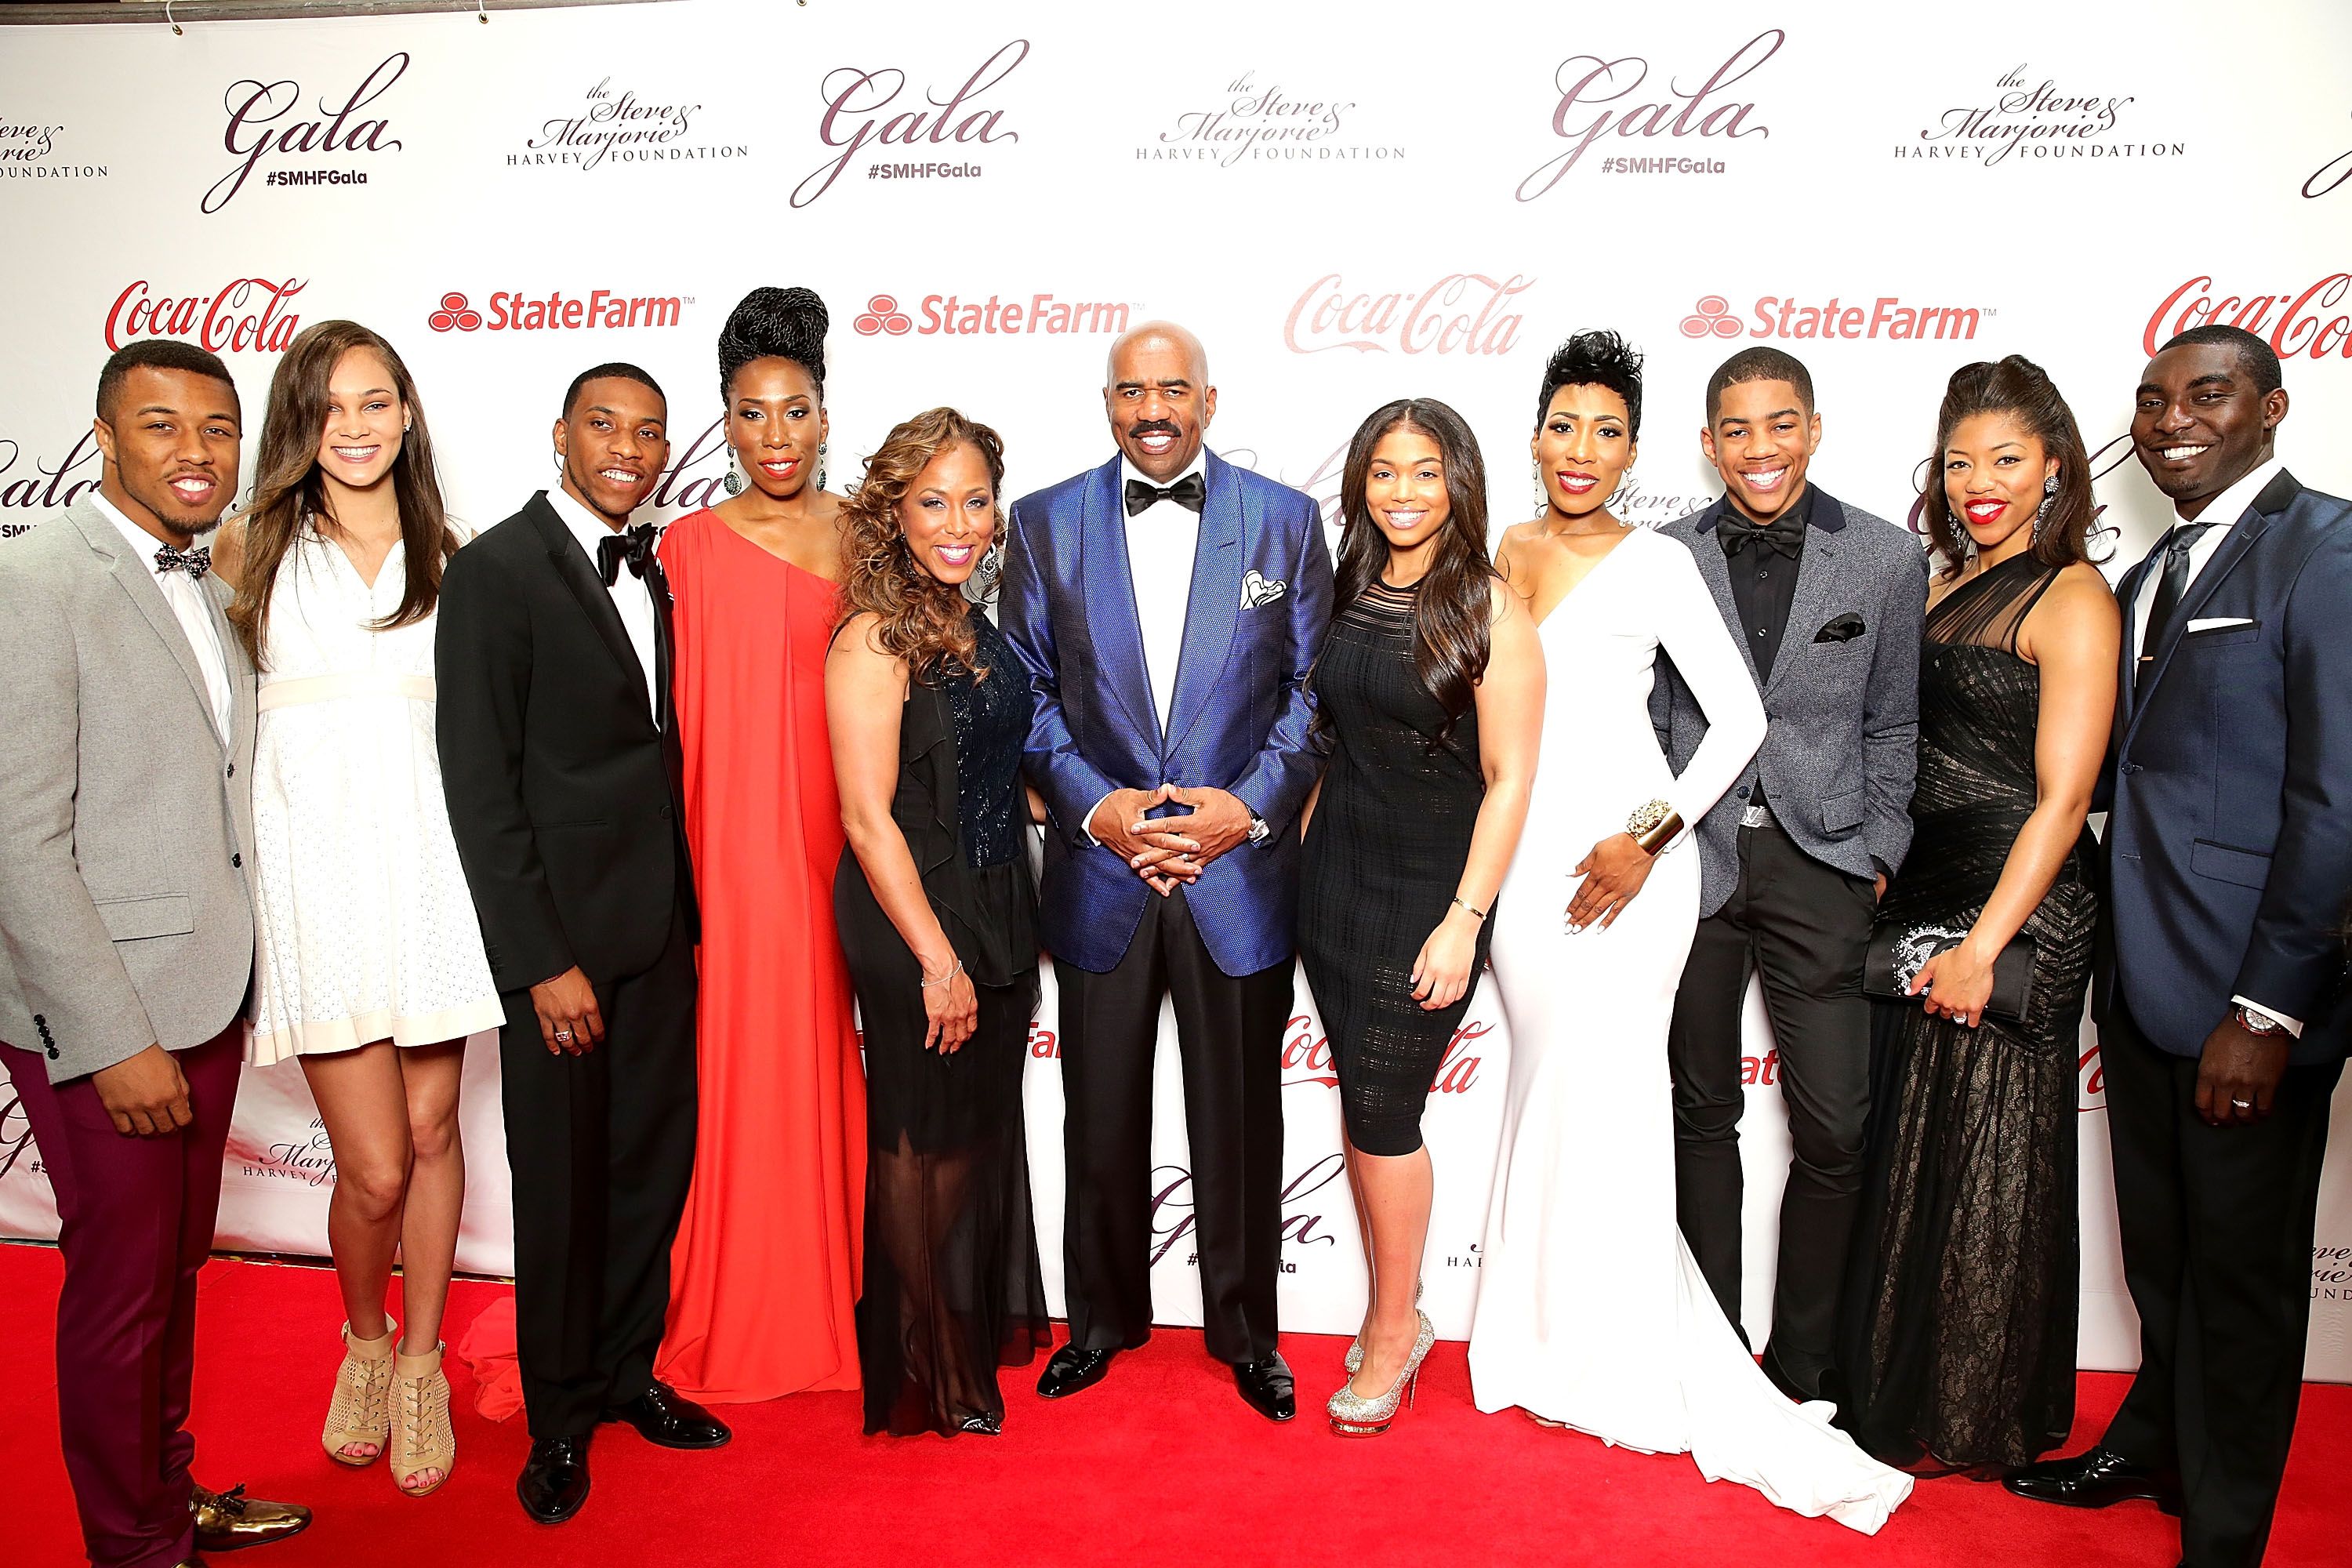 Steve and Marjorie Harvey's blended family in 2014. From left to right, Jason Harvey with wife, Amanda, Broderick Harvey, Jr., Brandi Harvey, Marjorie and Steve, Lori Harvey, Karli Harvey, Wynton Harvey, Morgan Hawthorne and husband, Kareem. | Photo: Getty Images